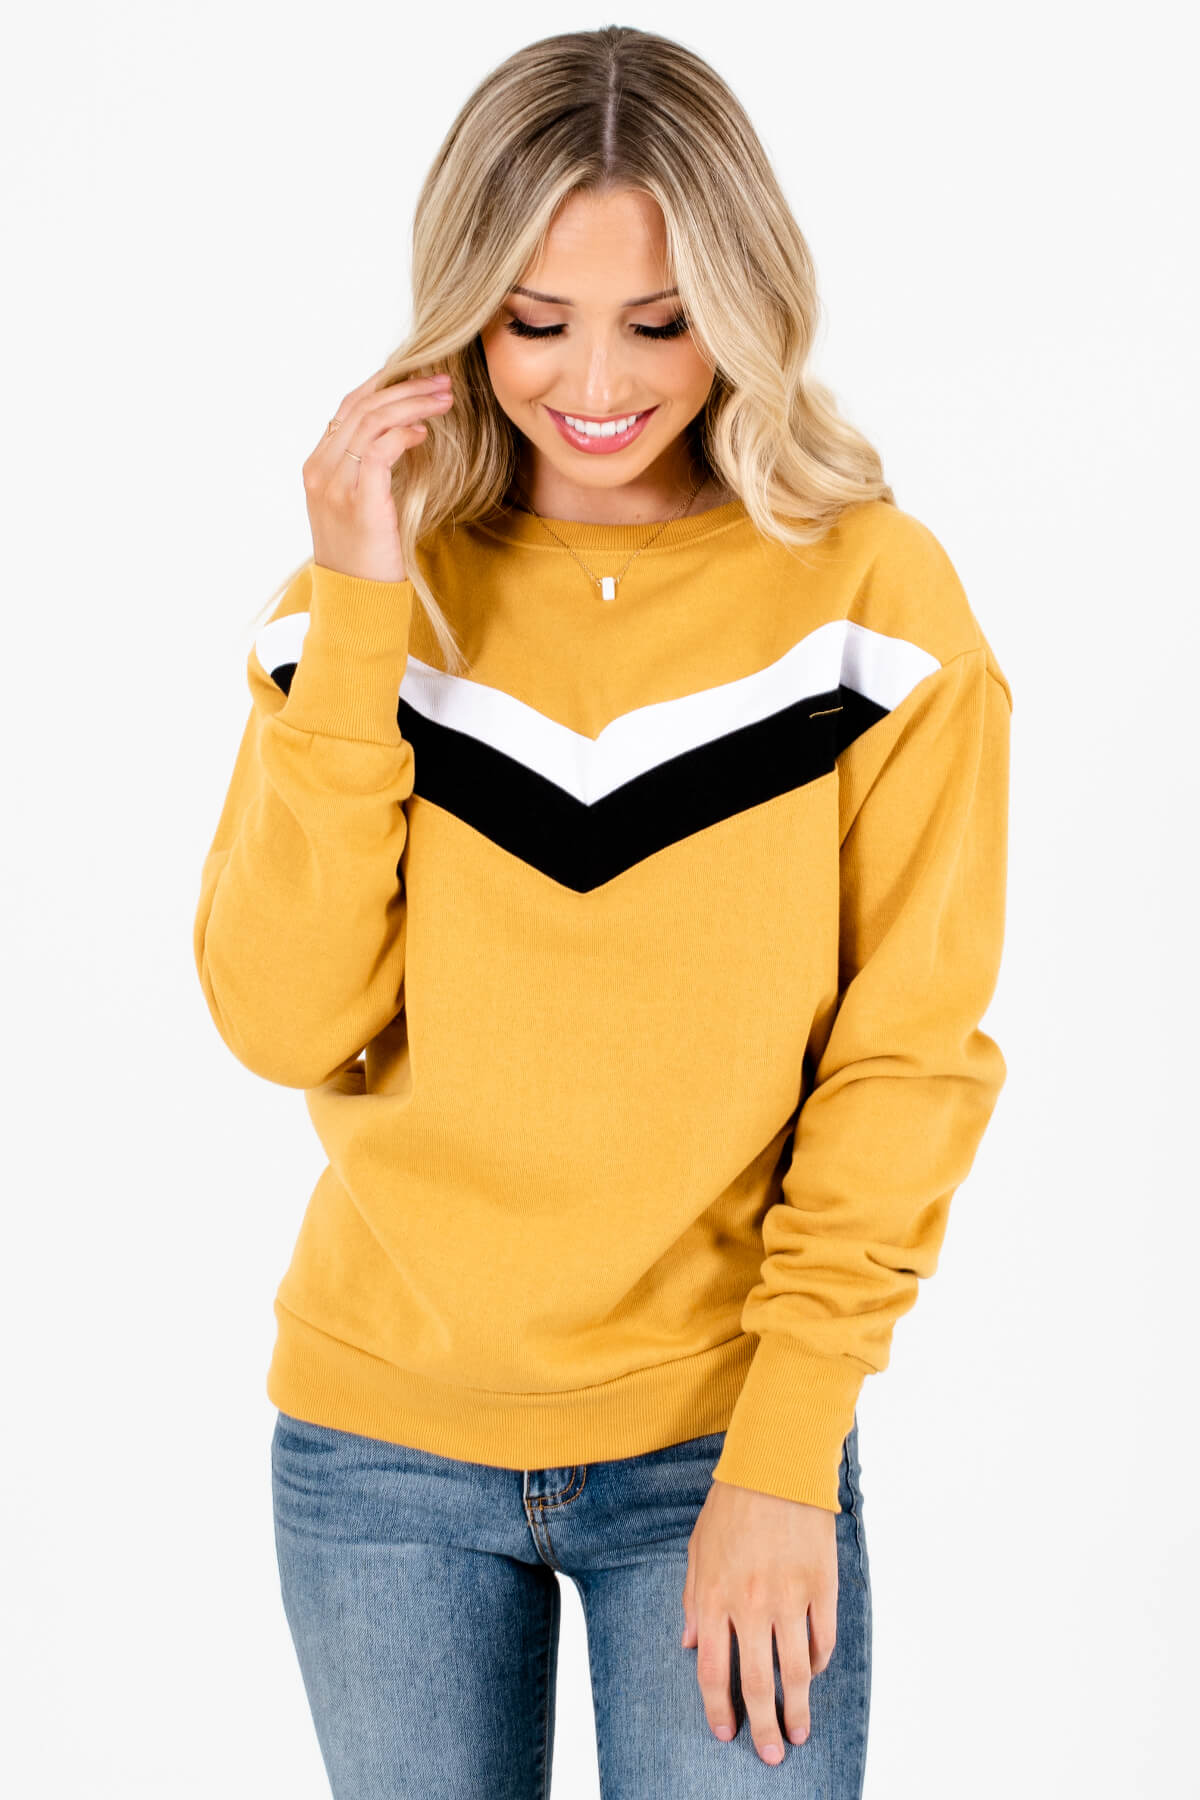 Mustard Yellow Long Sleeve Boutique Pullovers for Women